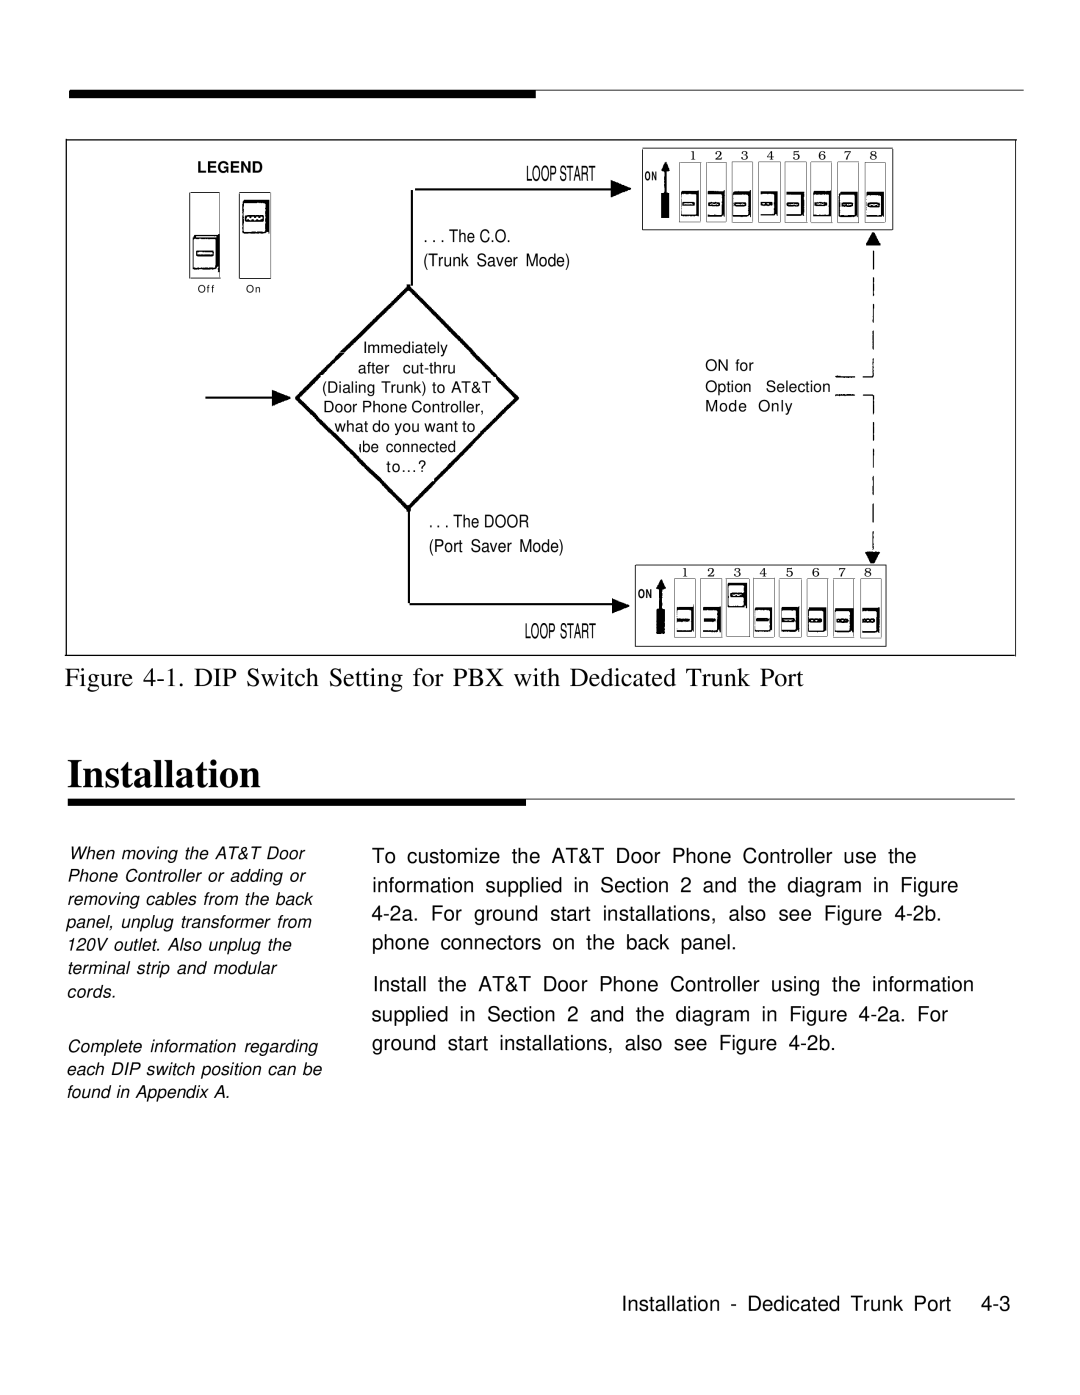 AT&T Door Phone Controller operation manual DIP Switch Setting for PBX with Dedicated Trunk Port 